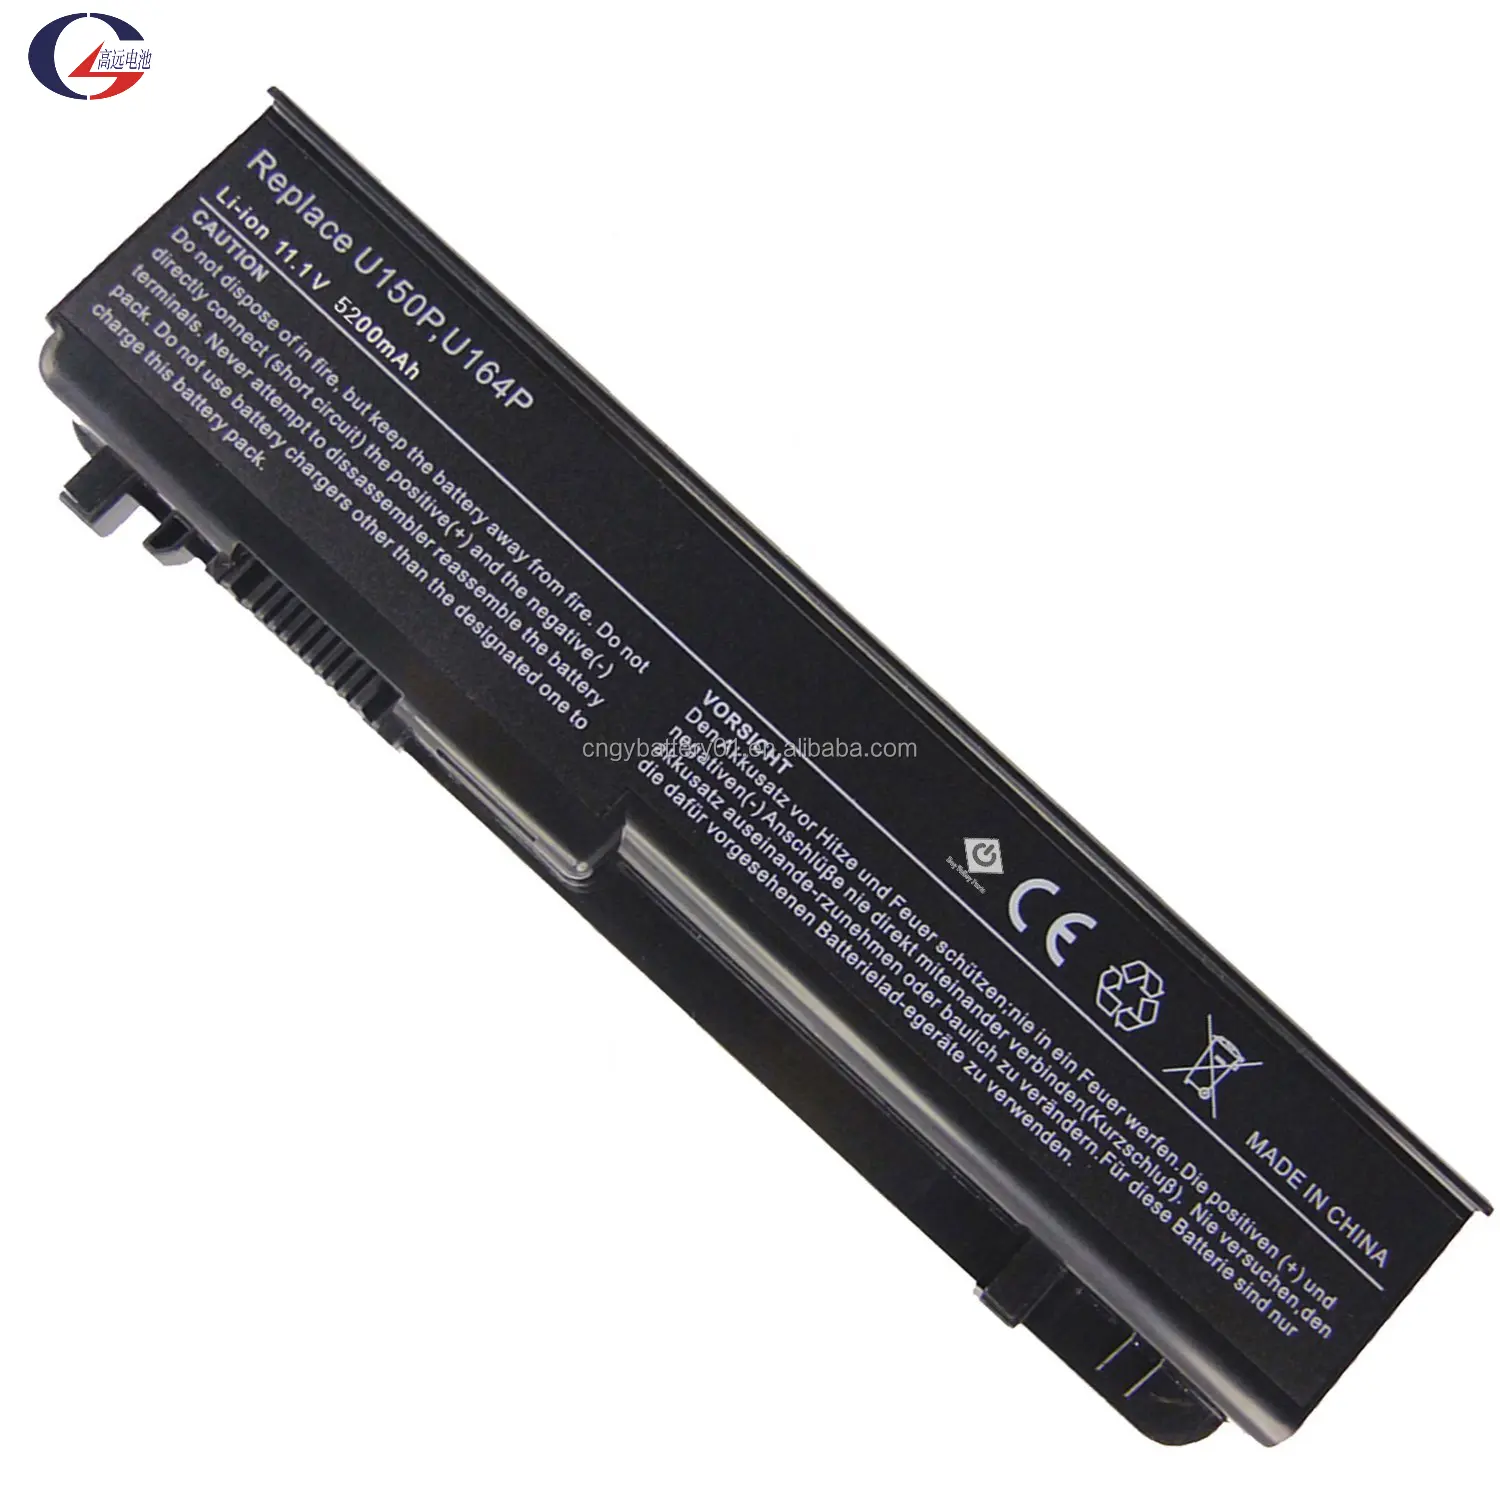 Lithium-Ion Replacement Battery laptop computer battery for Dell Studio 1745 Battery